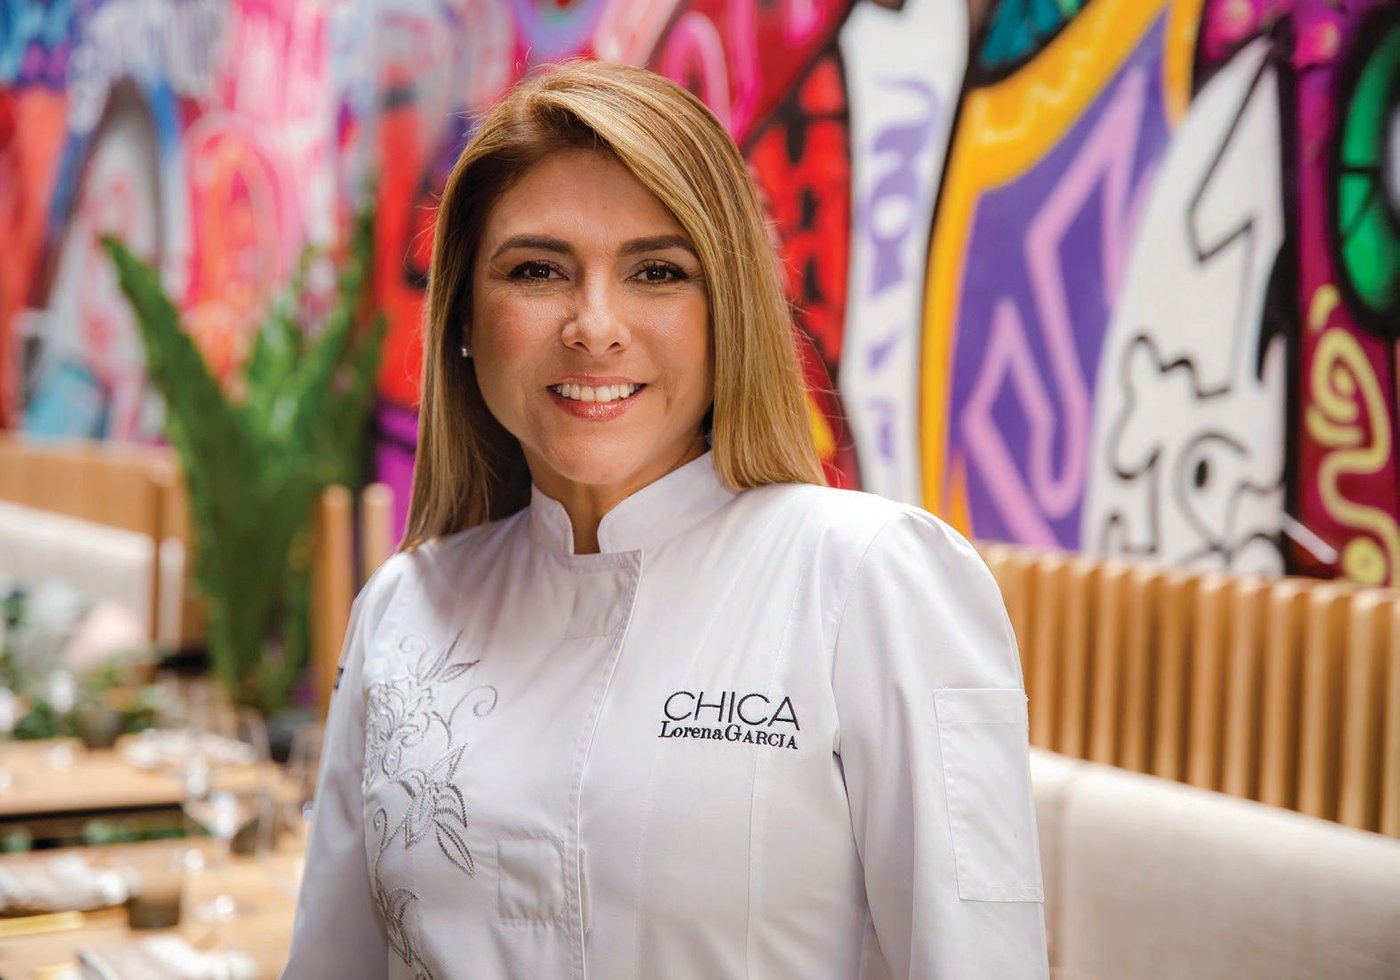 Chef Lorena Garcia brings her Top Chef flair to Aspen. PHOTO COURTESY OF 50 EGGS HOSPITALITY